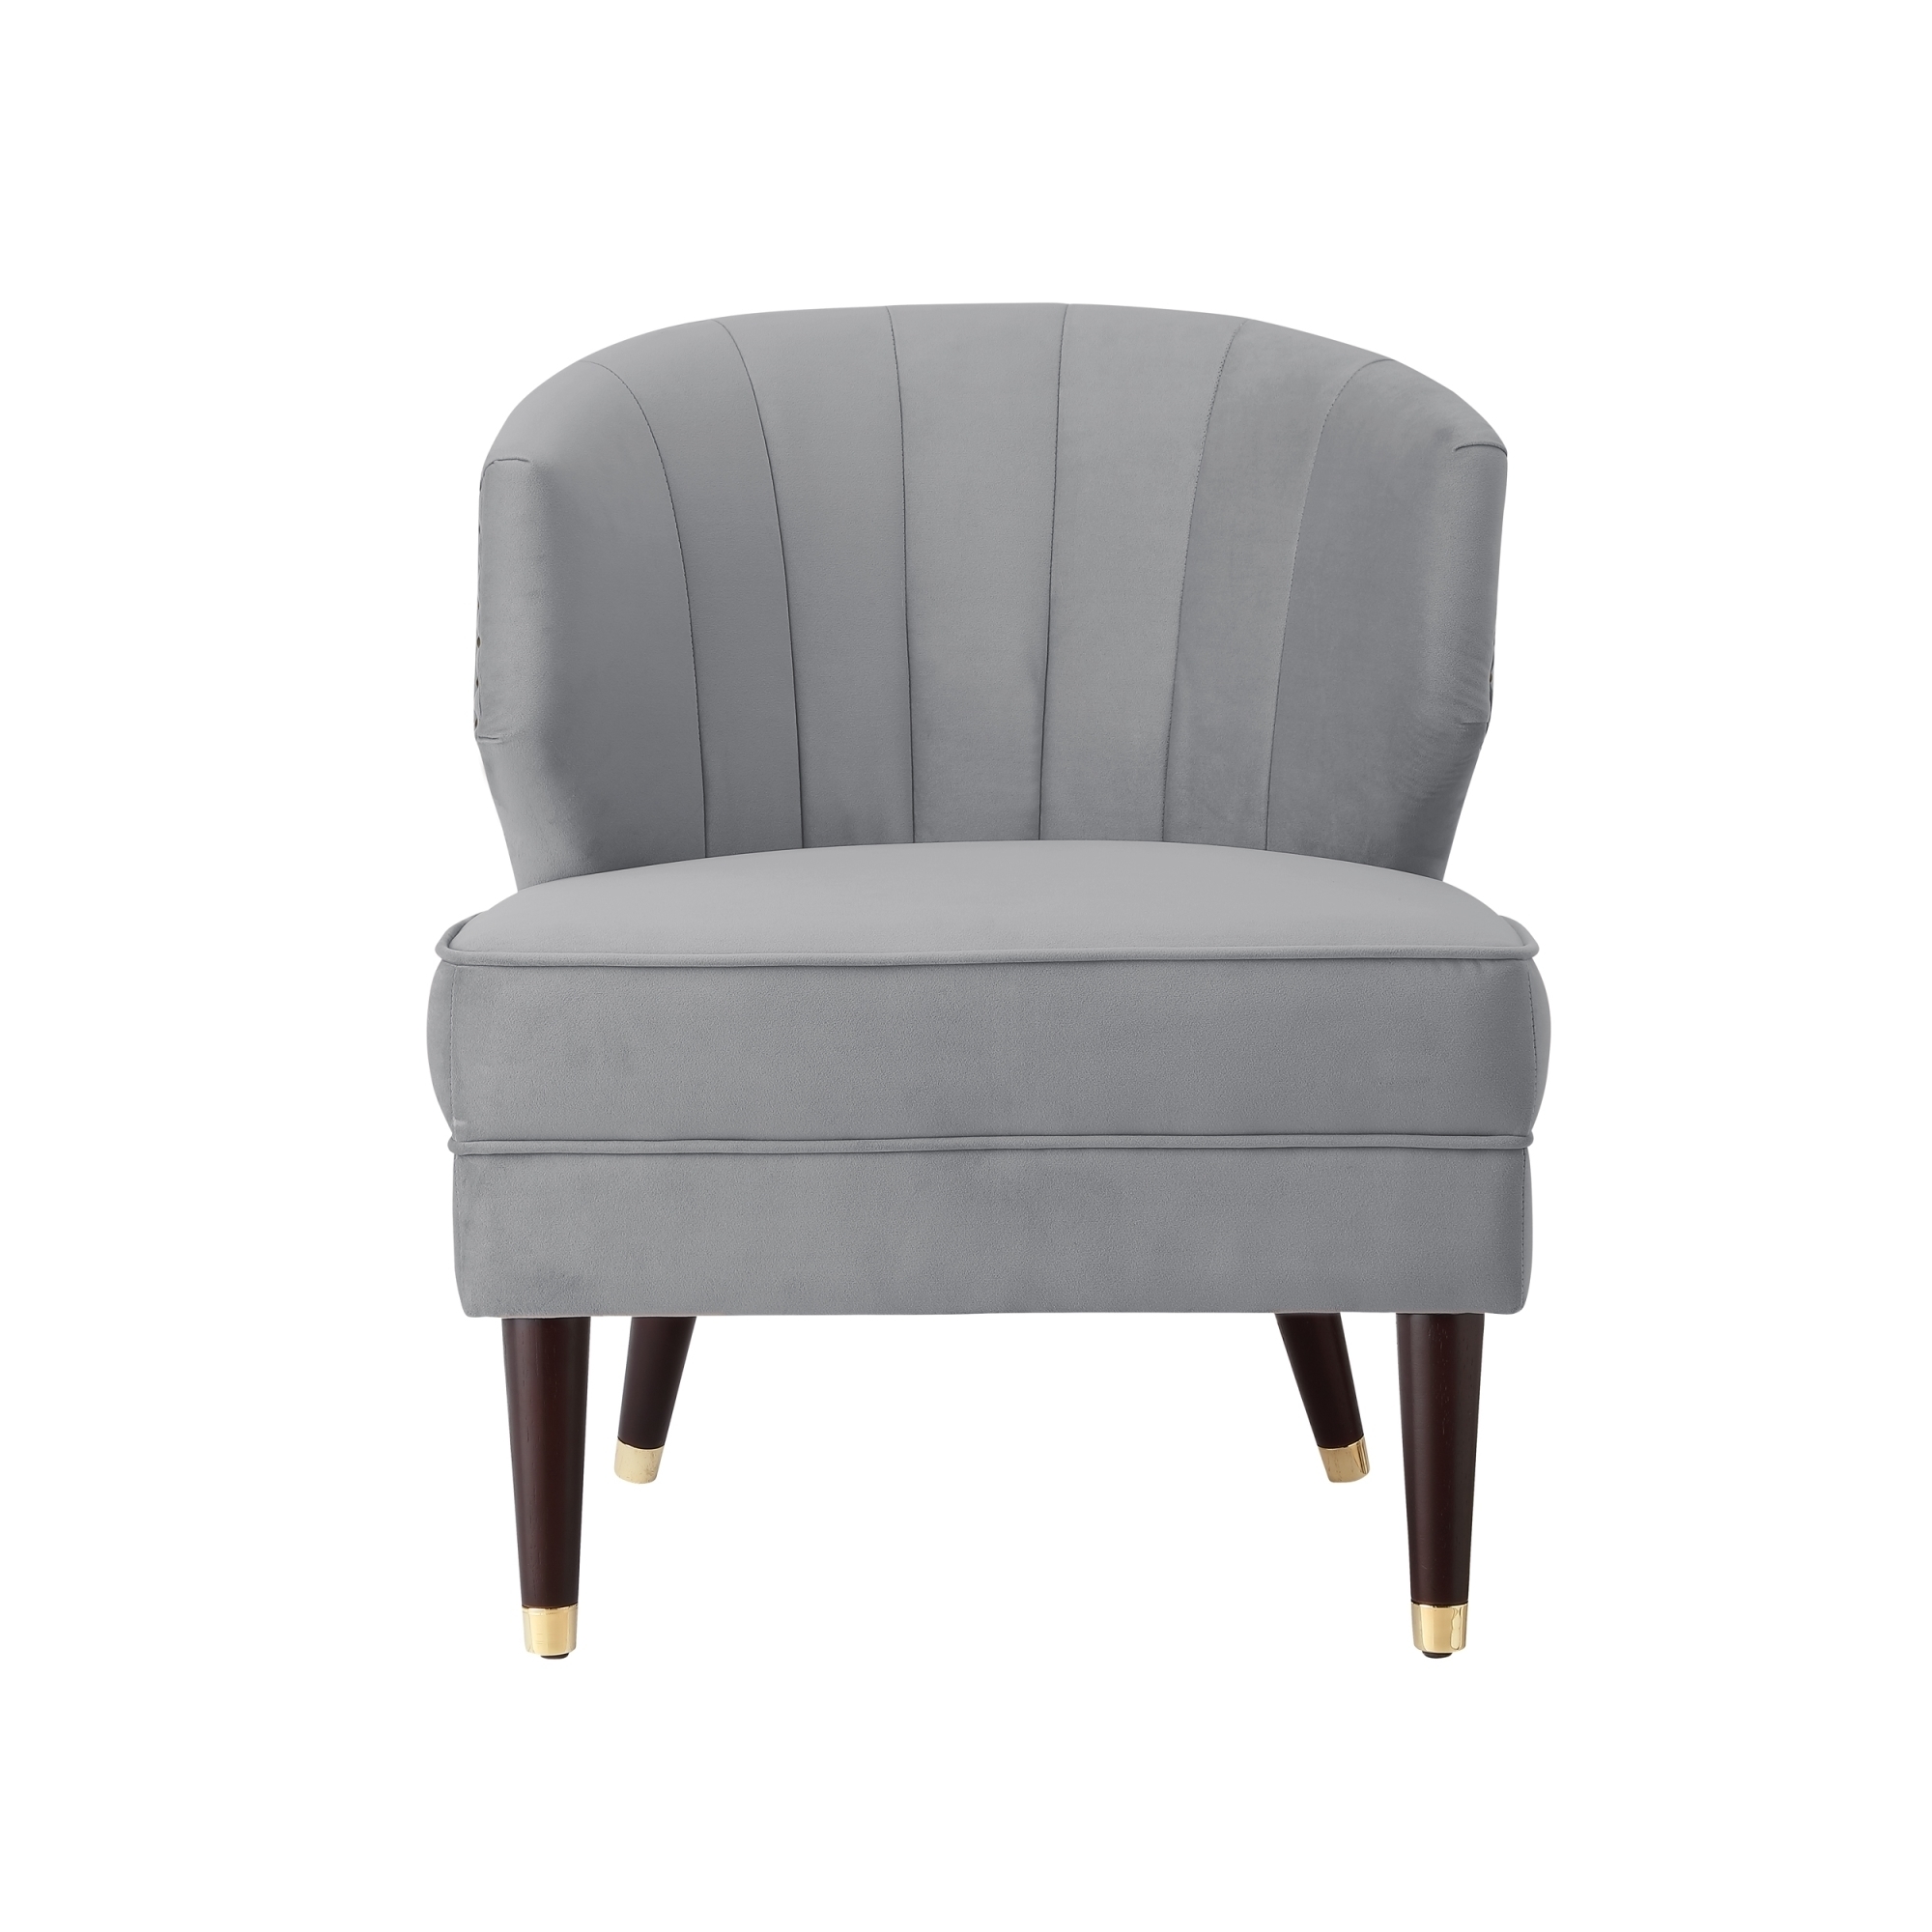 Nicole Miller Trung Velvet Accent Chair-Channel Tufted Back-Cherry Legs-Gold Metal Tip -Nailheads - Navy